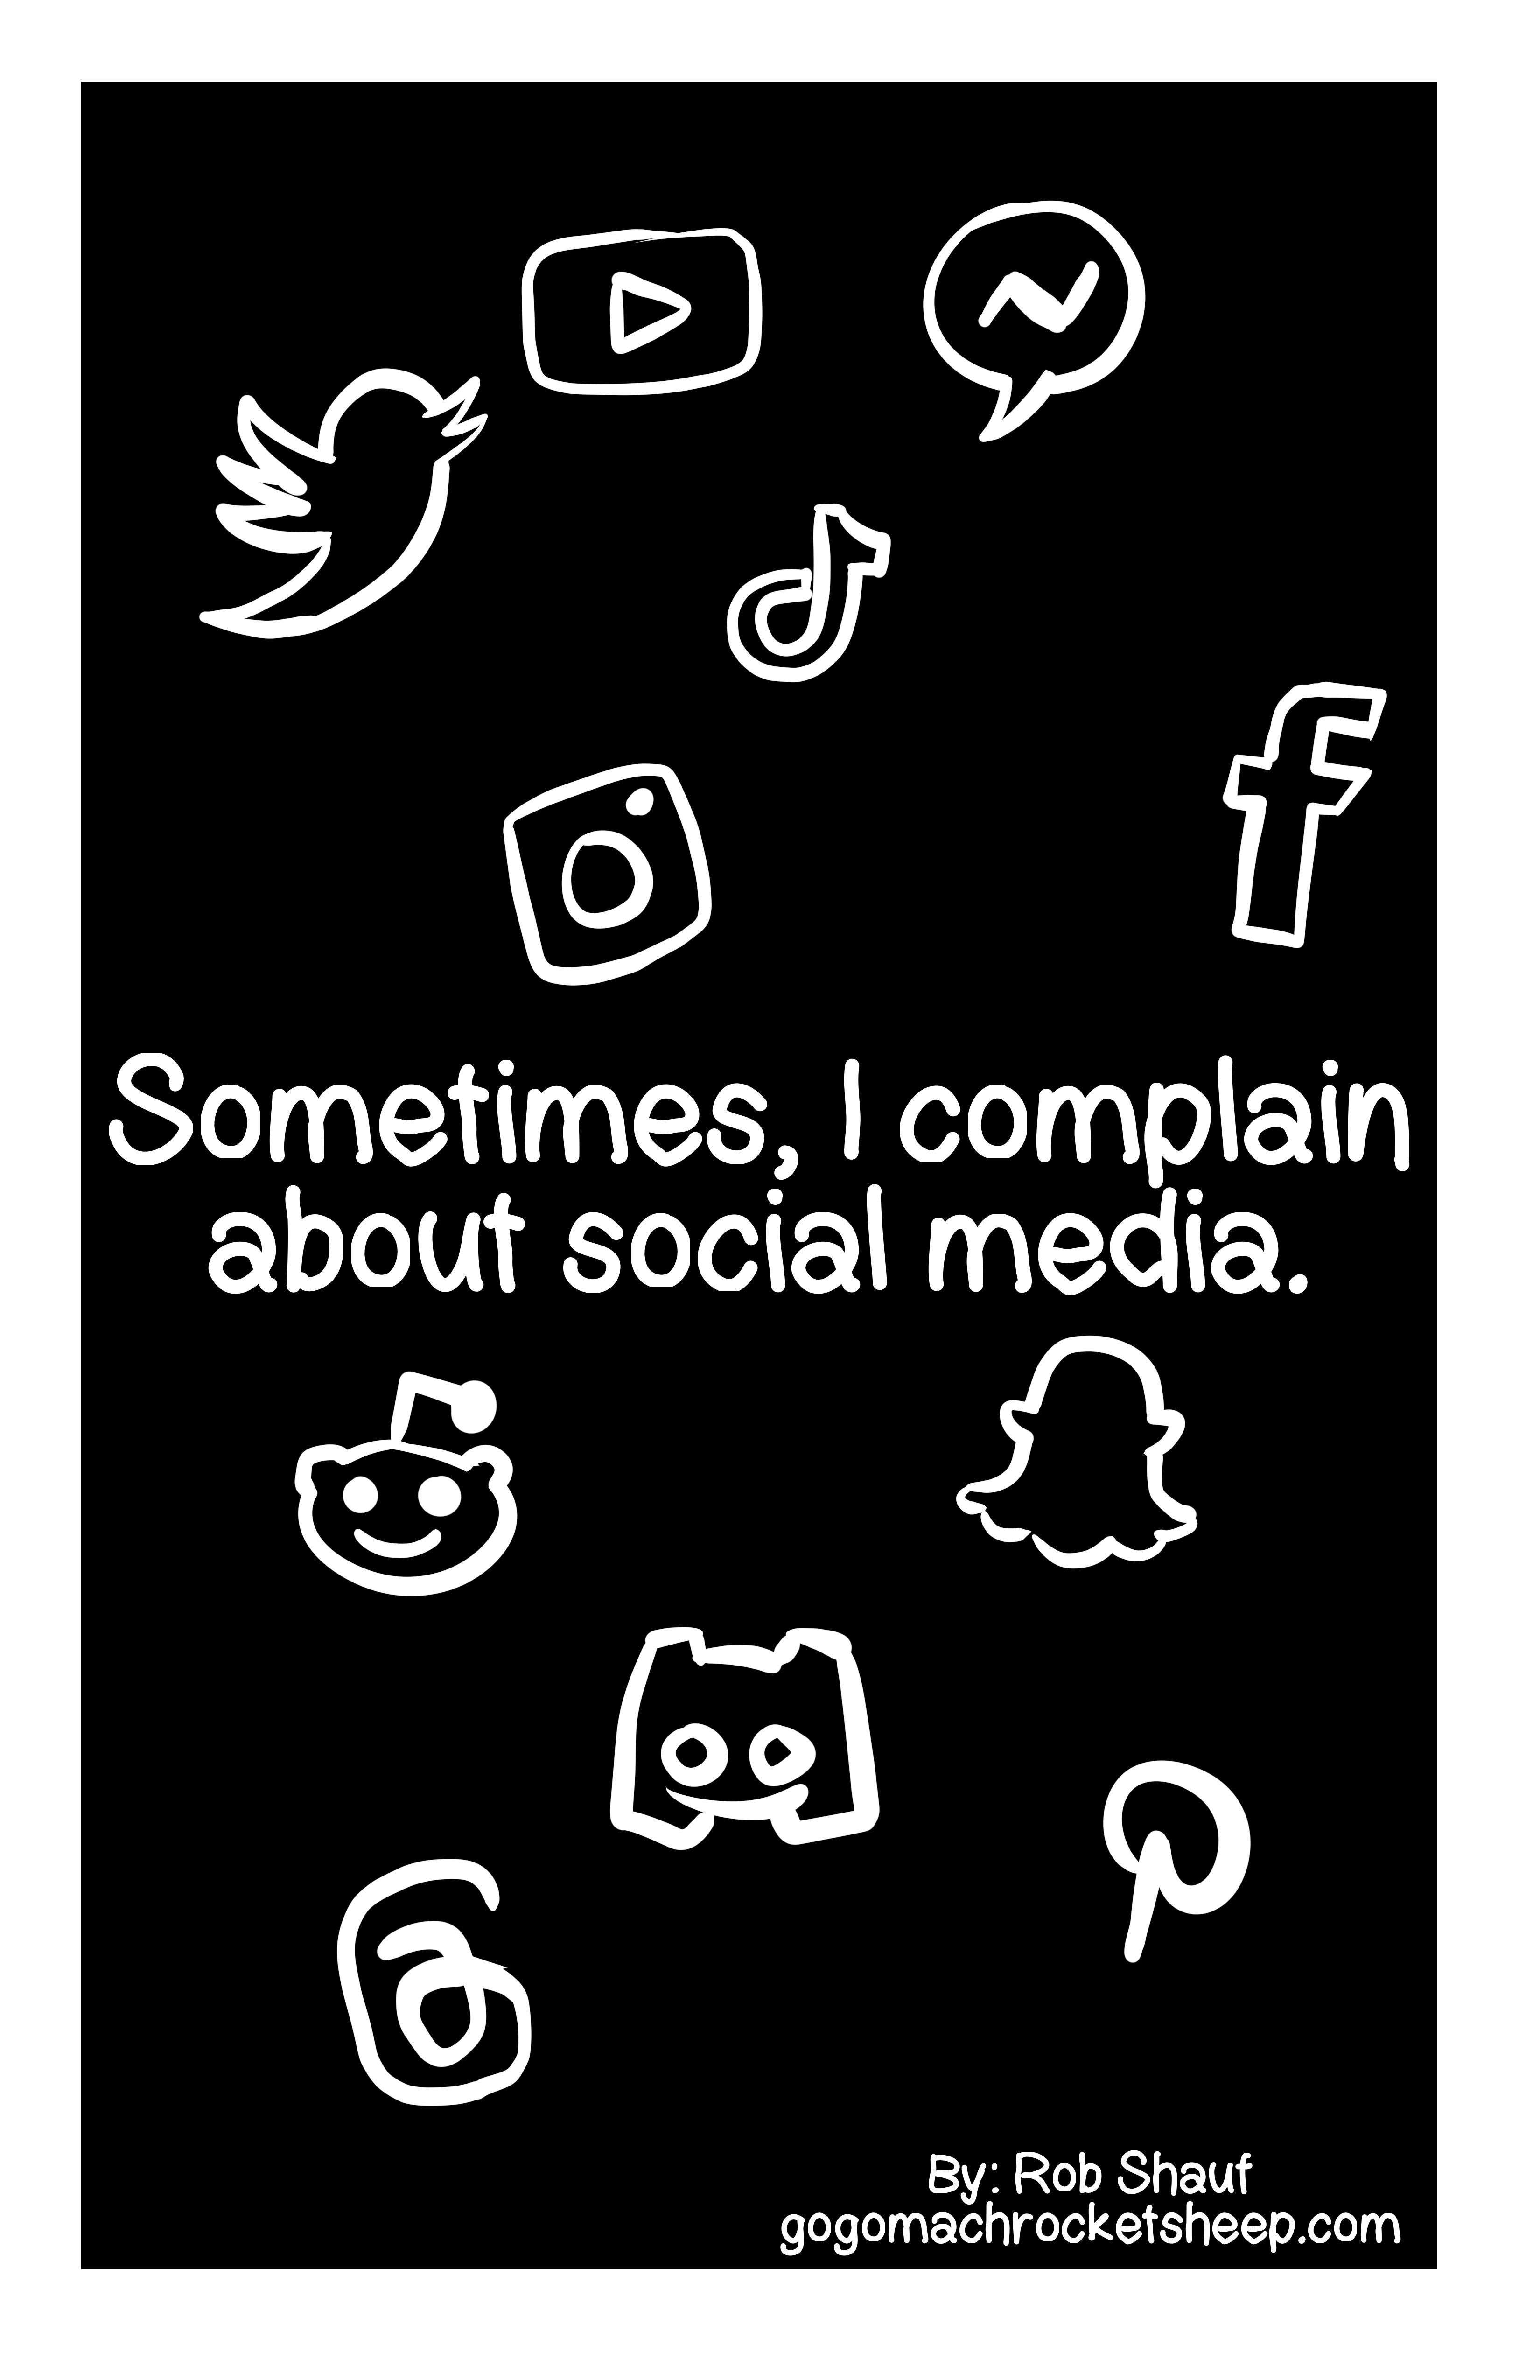 “Sometimes I complain about social media.”